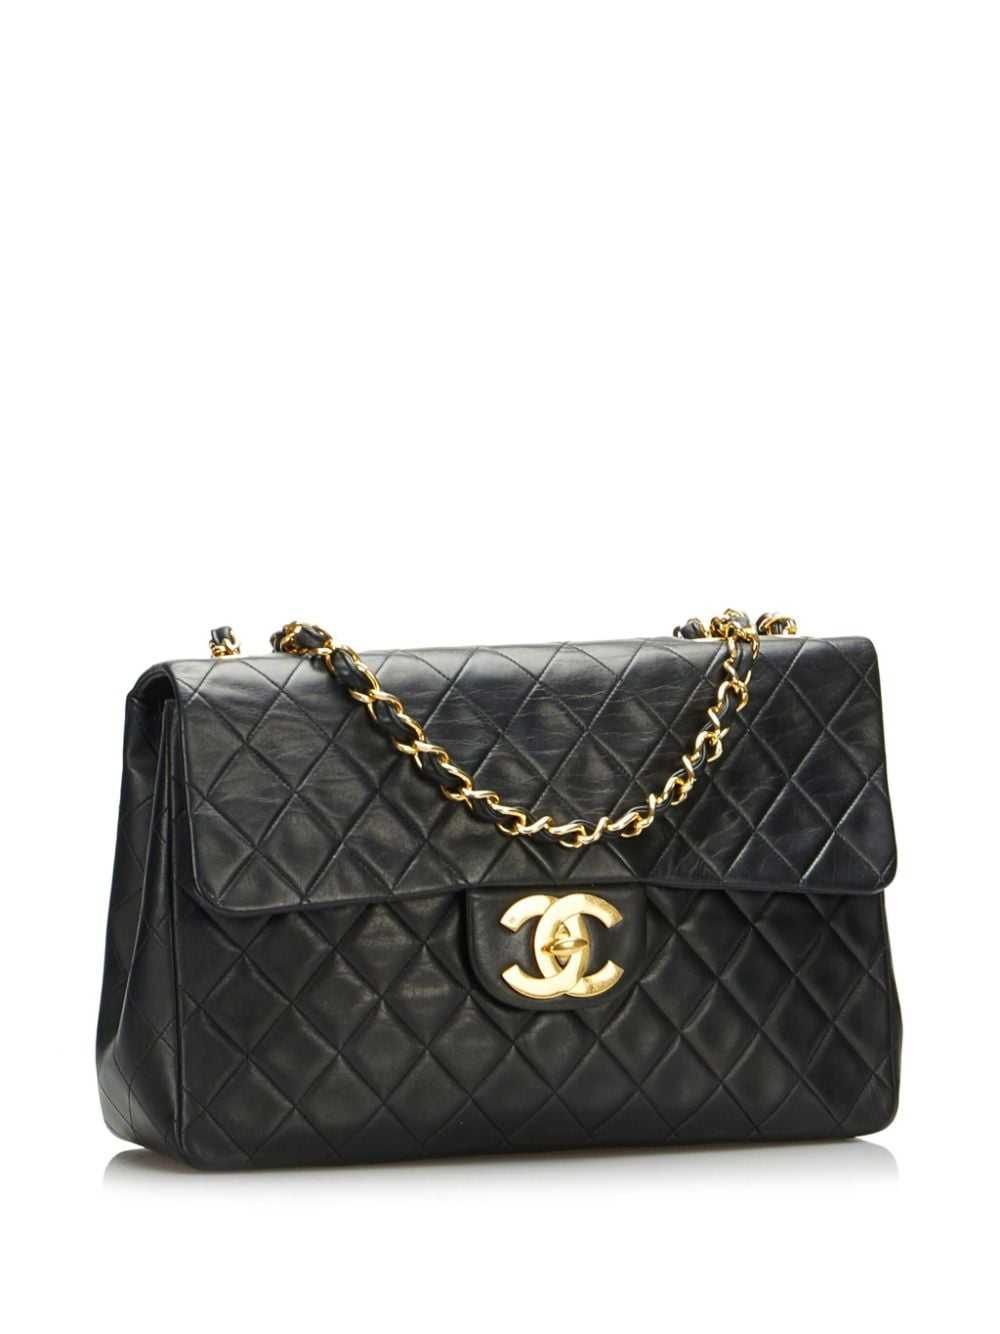 CHANEL Pre-Owned 1994-1996 Jumbo Classic Flap sho… - image 3